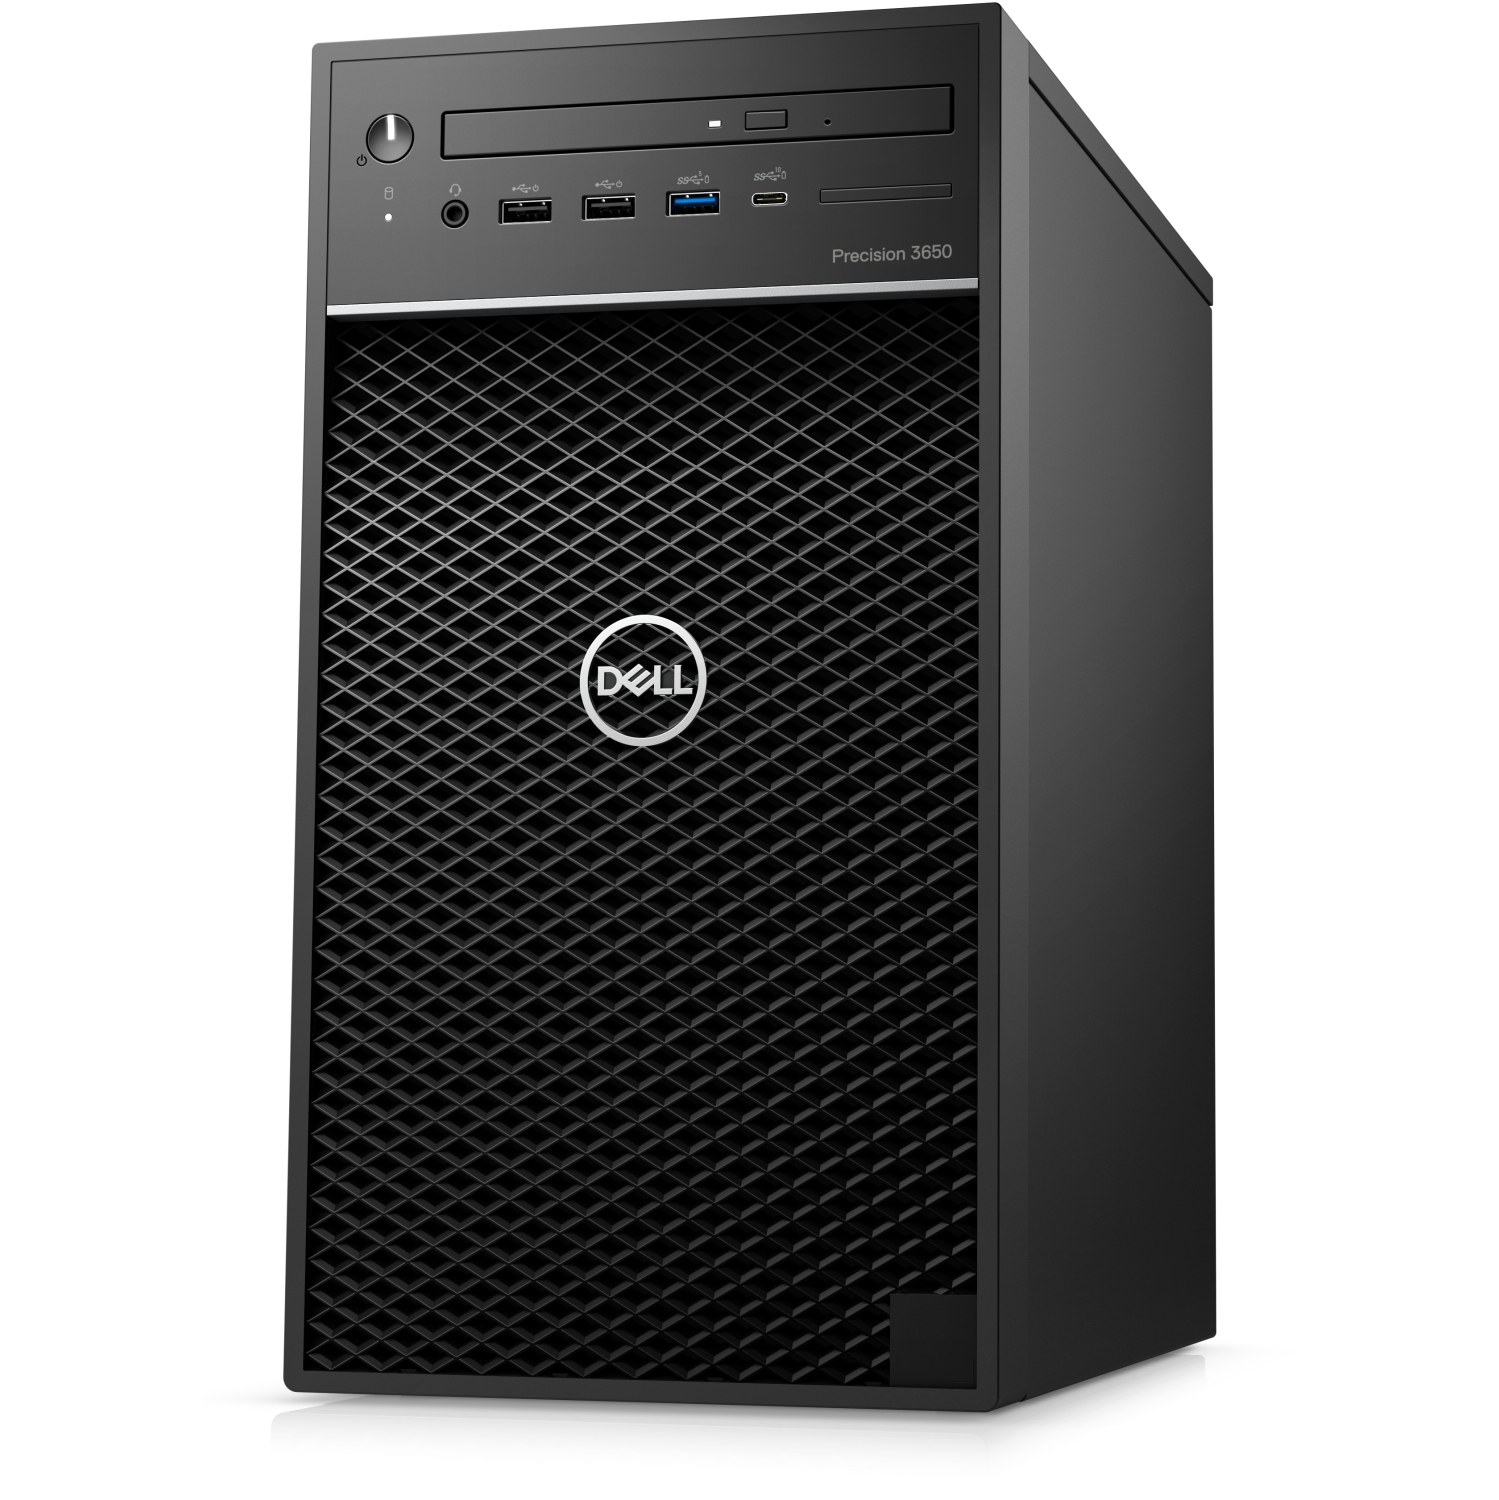 Refurbished (Excellent) - Dell Precision T3650 Workstation Desktop (2021), Core i9, 1TB SSD + 1TB HDD, 32GB RAM, RTX 3080, 8 Cores @ 4.9 GHz, 11th Gen CPU Certified